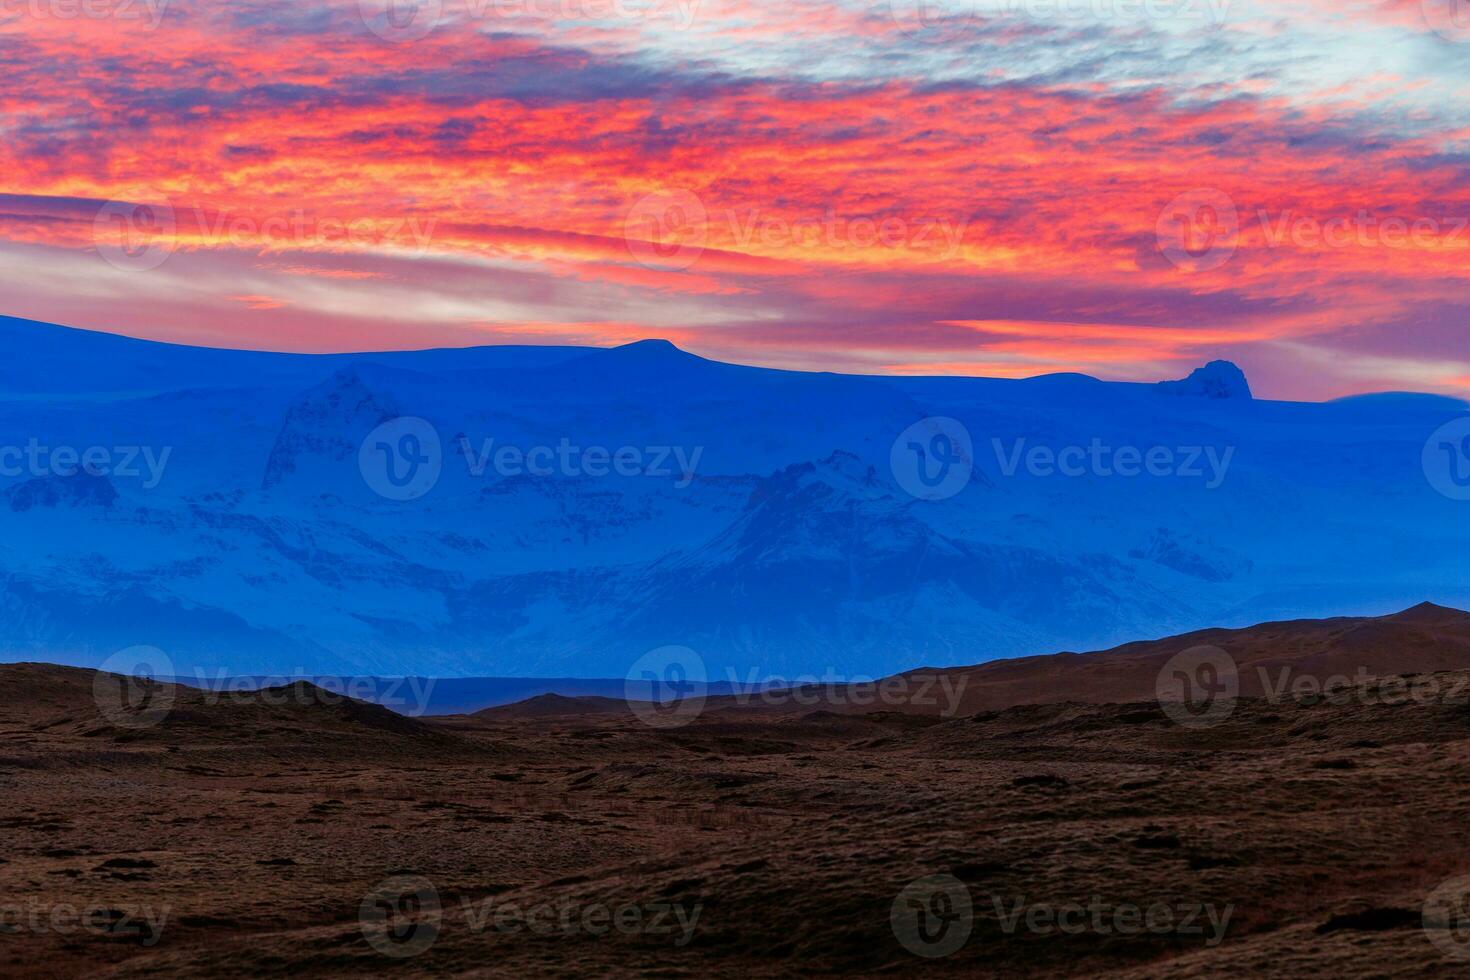 Icelandic chilly highlands with stunning sunset, concept for night photography. Breathtaking view of rosy cotton candy like sky due to sun setting above grand nordic mountain ranges. photo